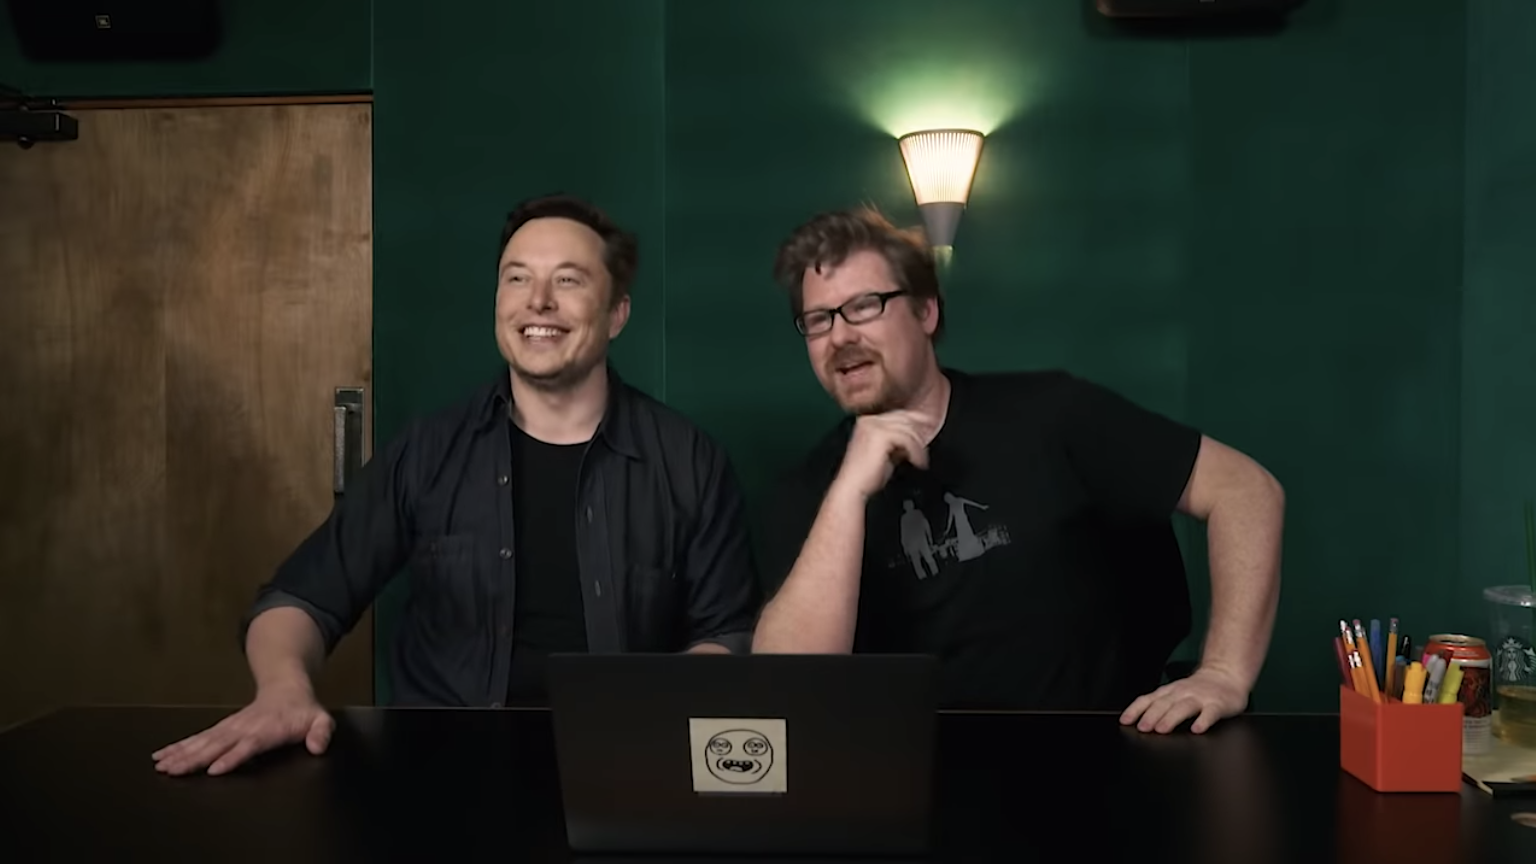 Elon Musk finally hosted meme review with the co-creator of Rick and Morty